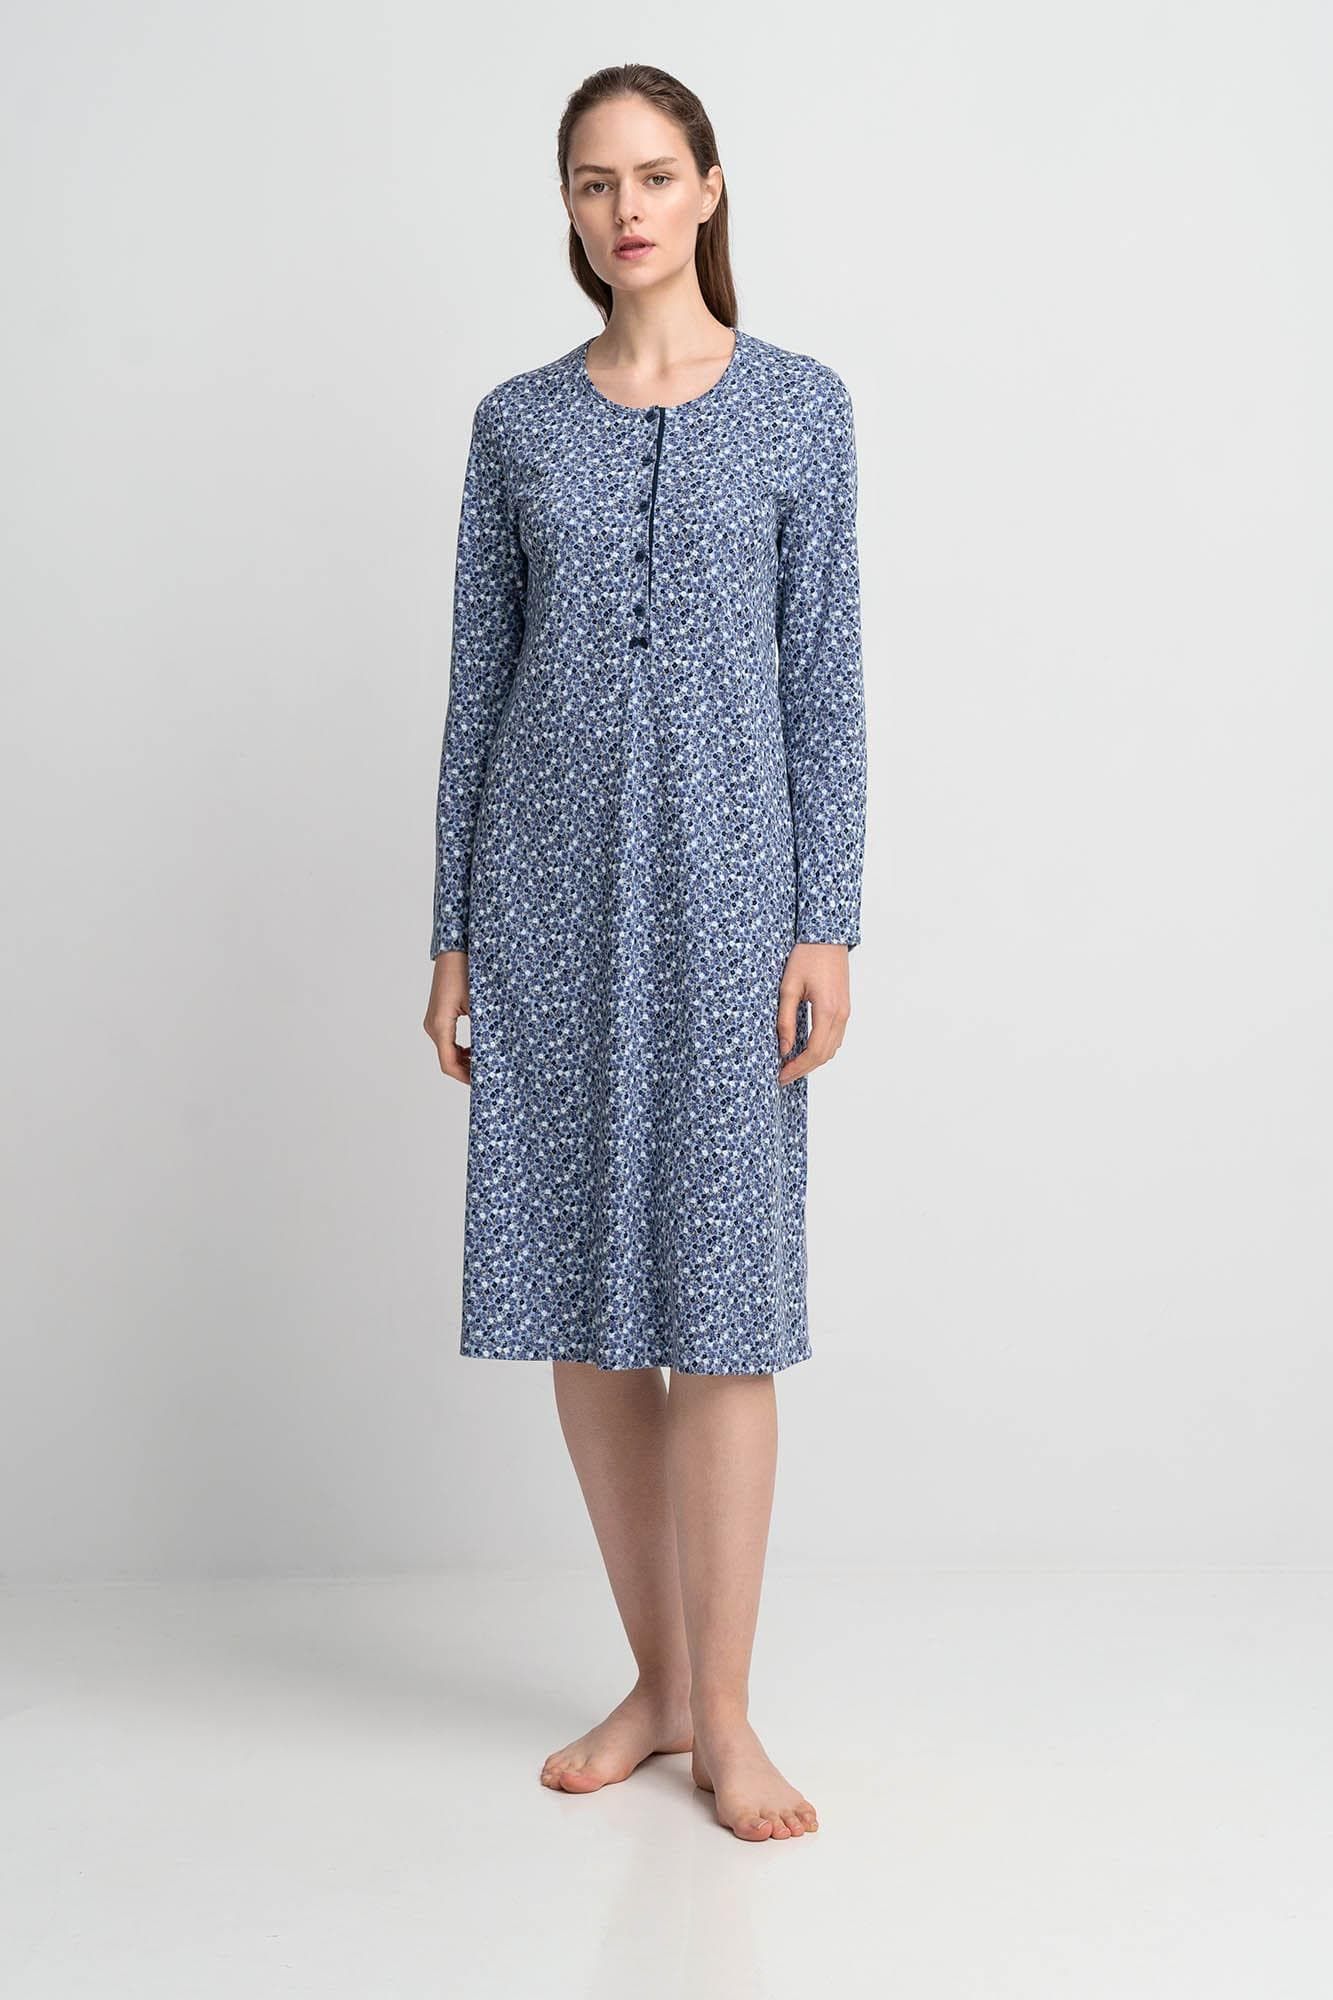 Women’s Printed Nightgown